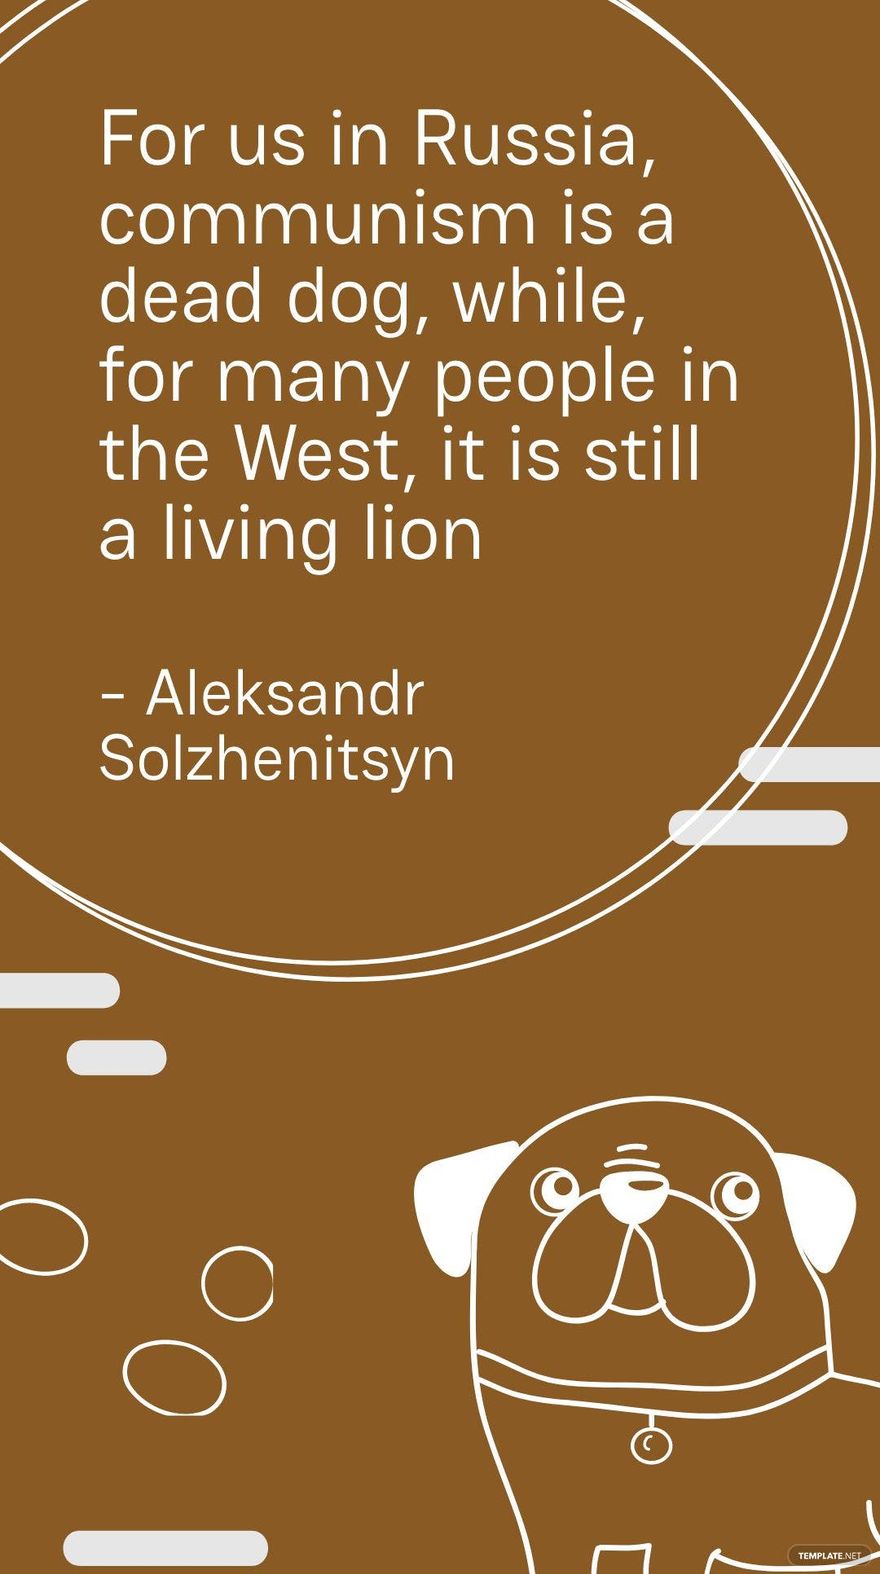 Free Aleksandr Solzhenitsyn - For us in Russia, communism is a dead dog, while, for many people in the West, it is still a living lion in JPG